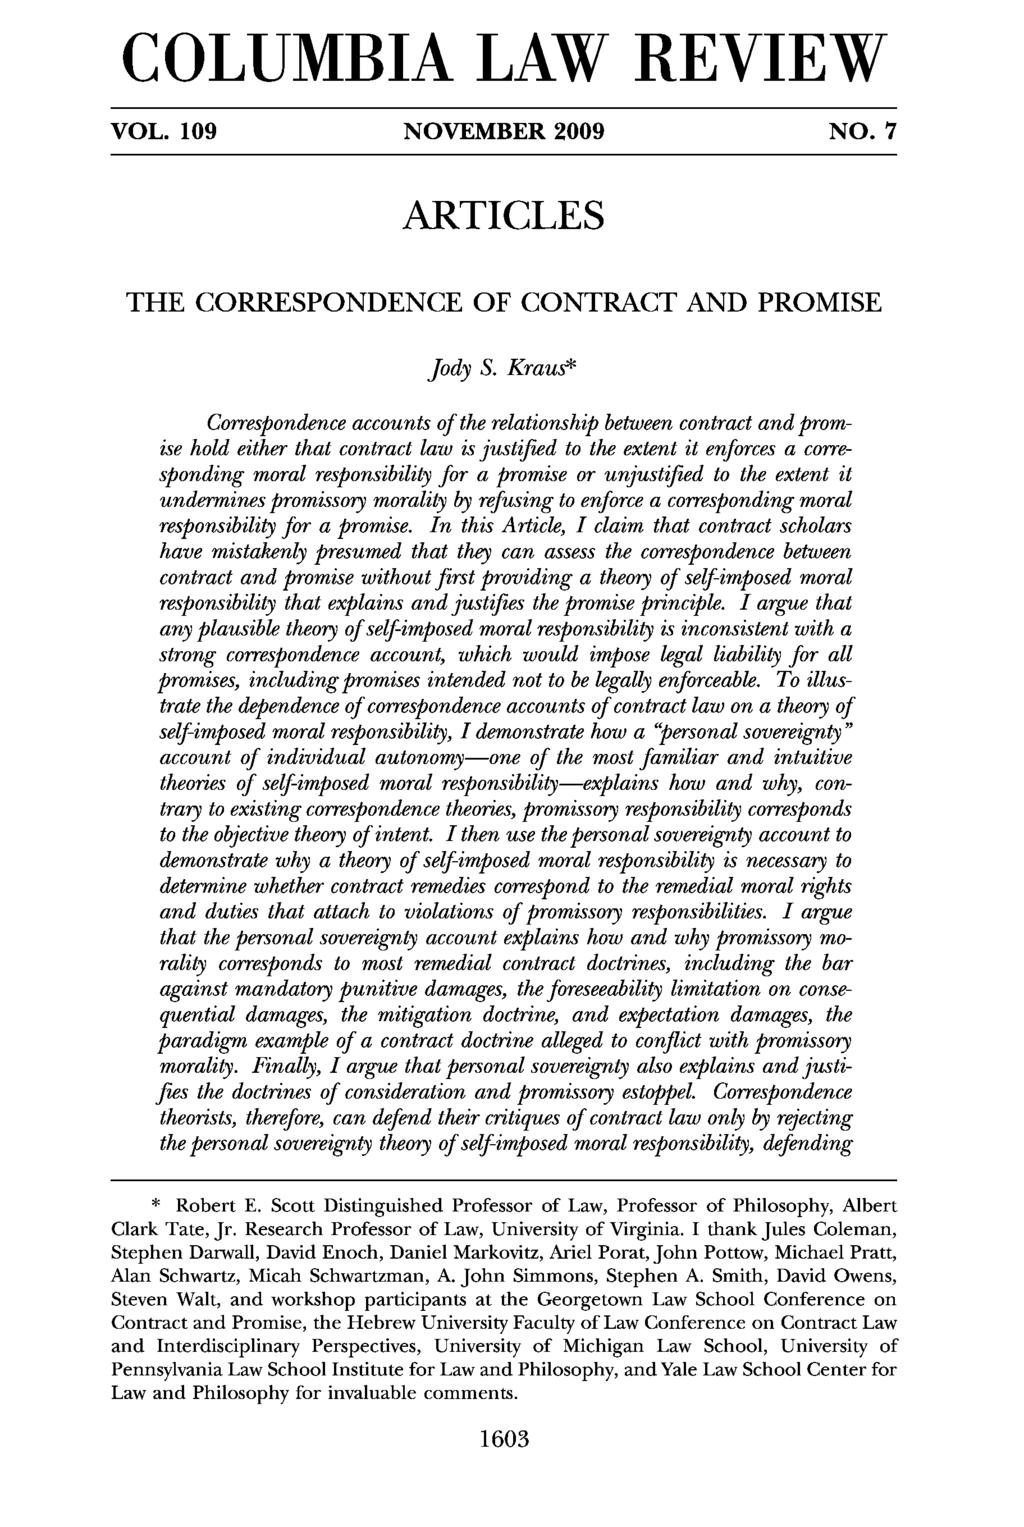 COLUMBIA LAW REVIEW VOL. 109 NOVEMBER 2009 NO. 7 ARTICLES THE CORRESPONDENCE OF CONTRACT AND PROMISE Jody S.